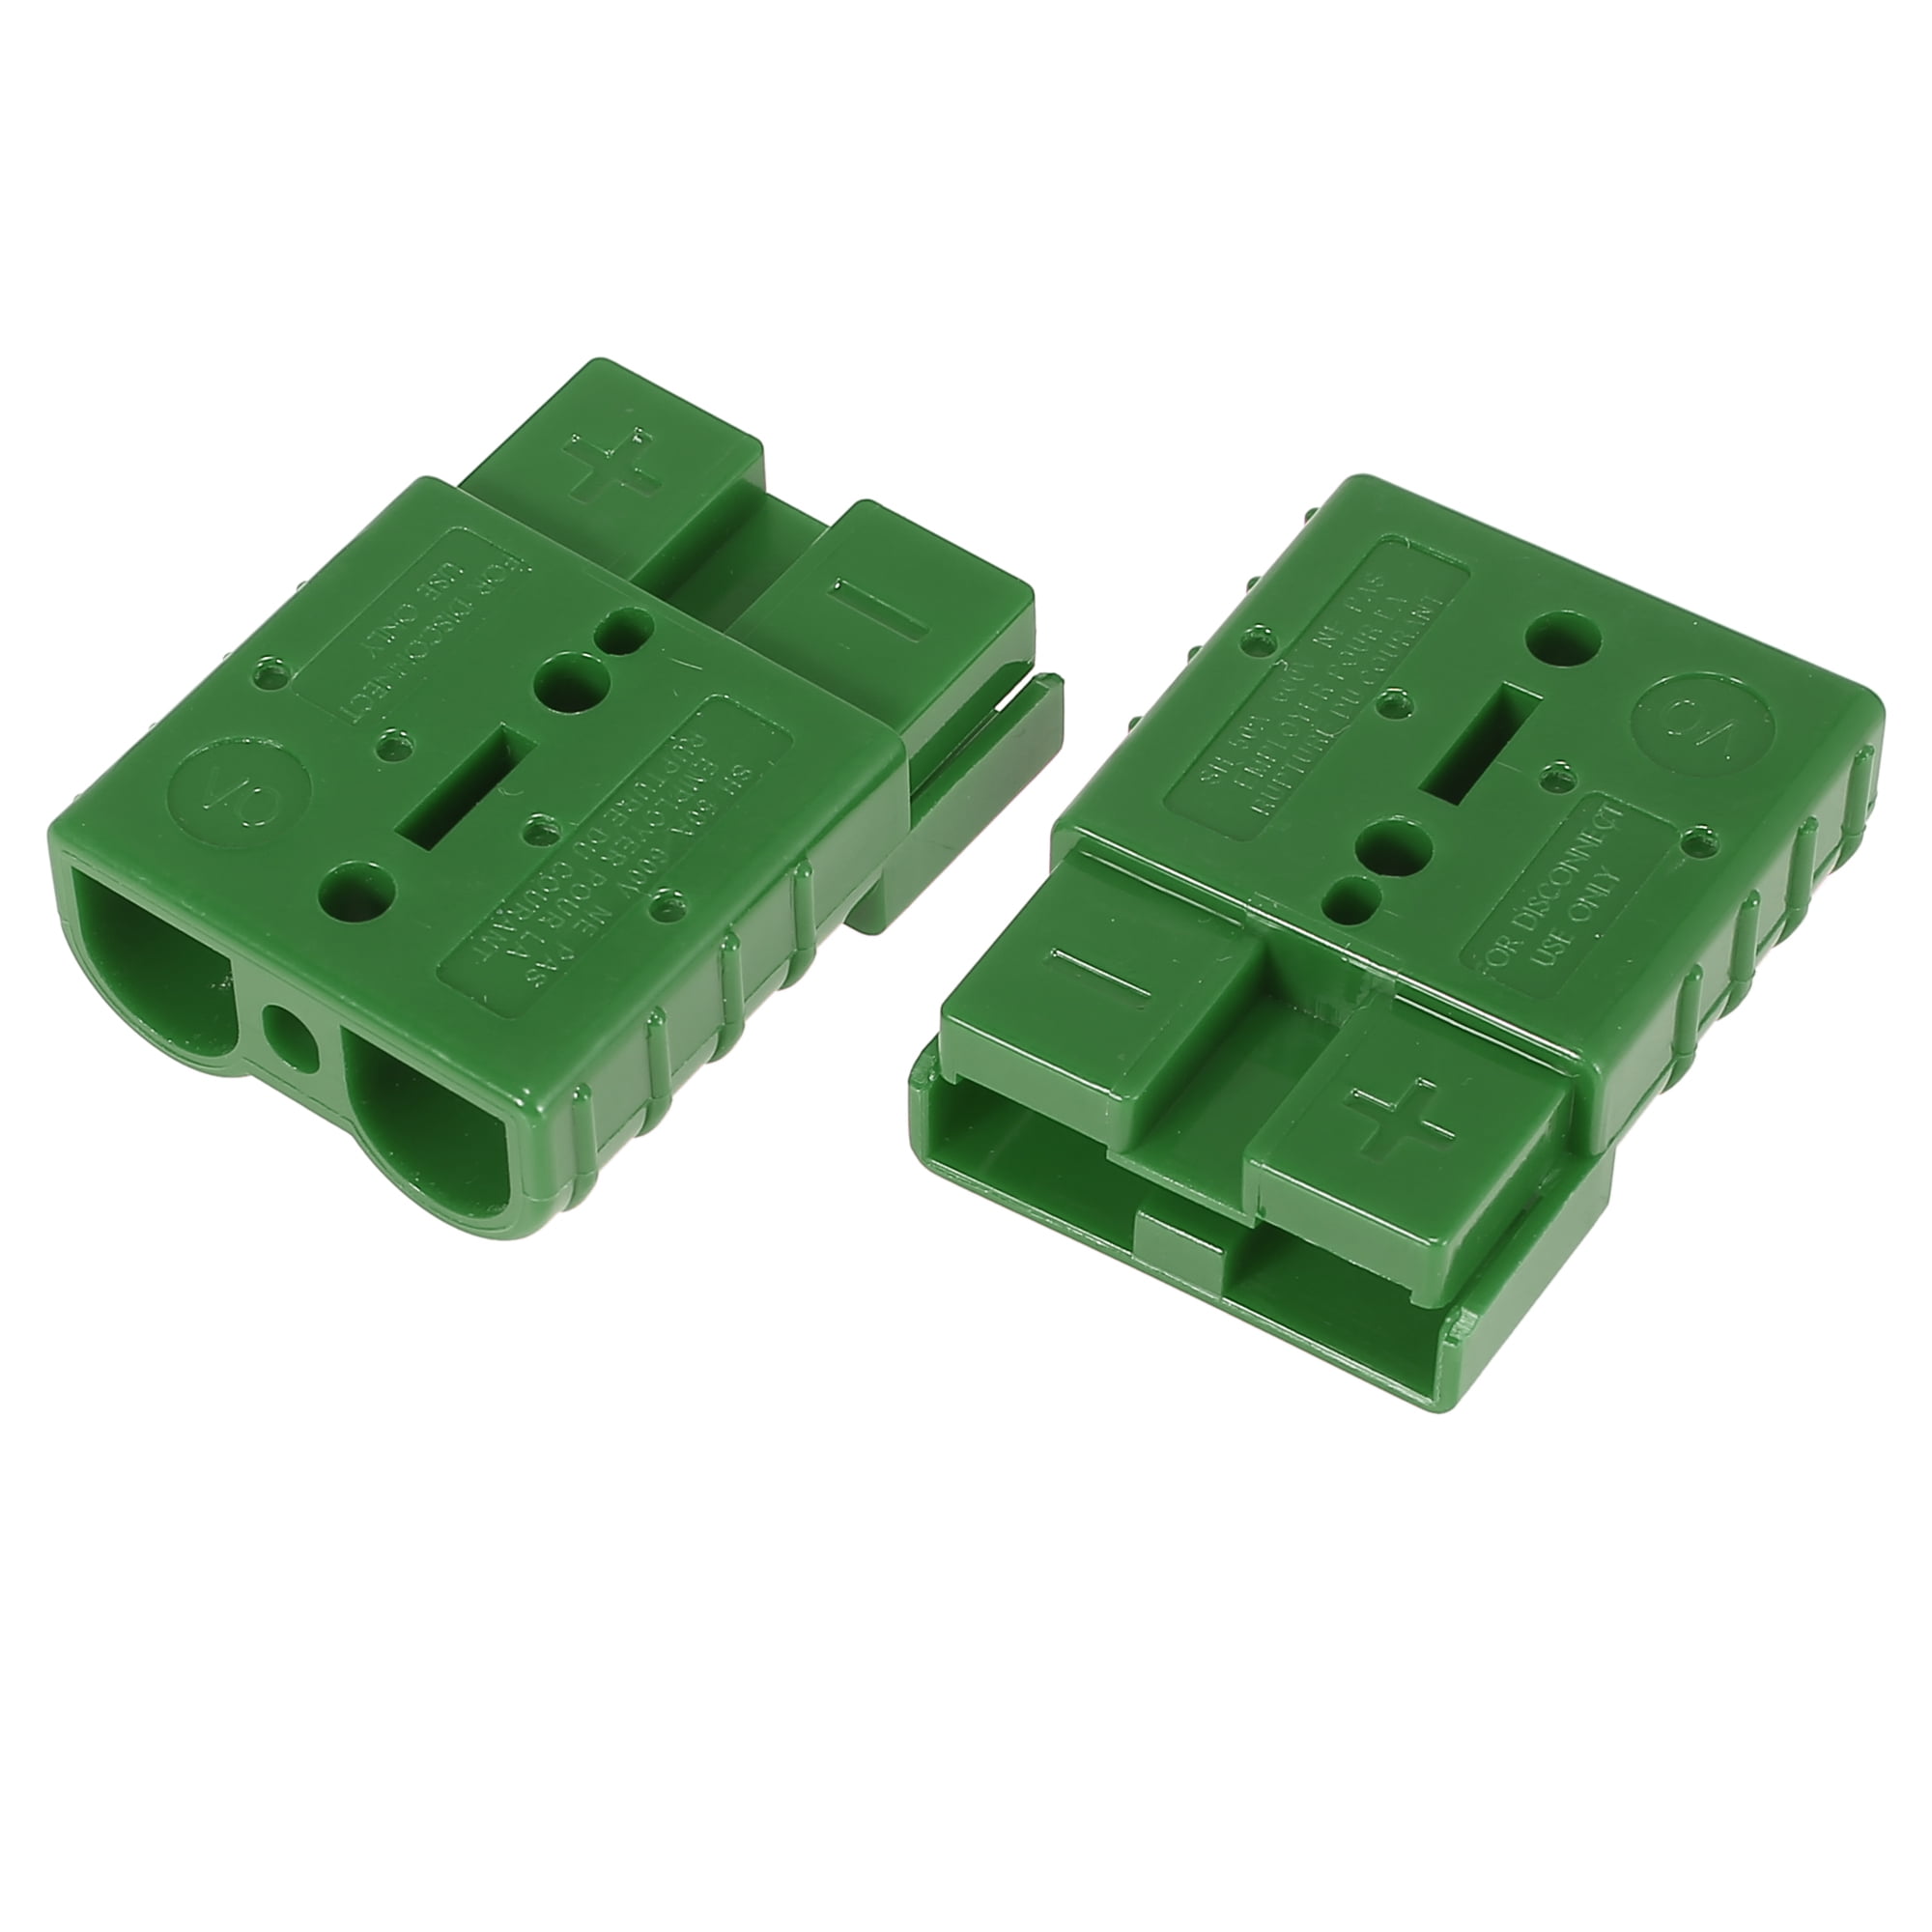 2pcs 600V 50A Battery Quick Connect Disconnect Wire Harness Plug w/ Cover  for Trailer Forklift 7 8 10 AWG Green 